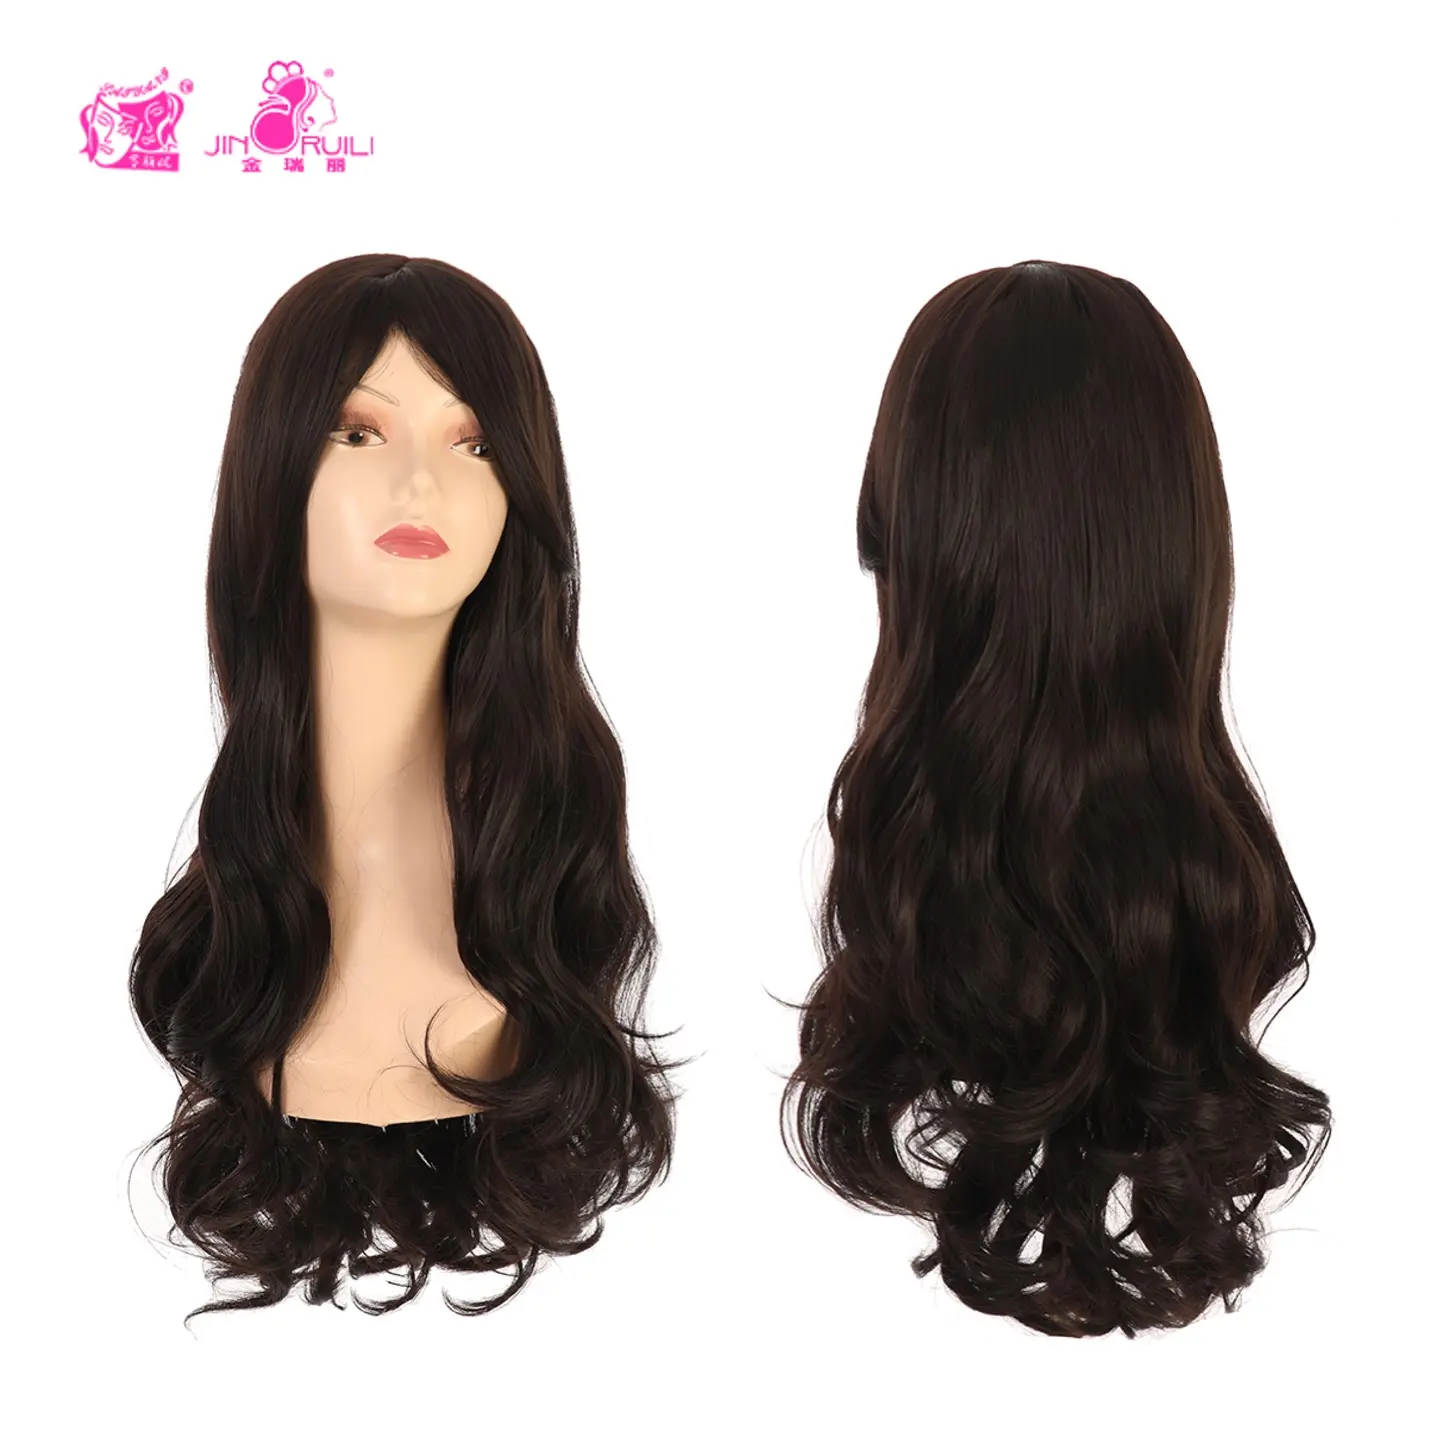 JINRUILI Top Quality High Temperature Synthetic wigs Natural Black Long Body Wave Hair Loose Wave Beautiful Wigs for Woman